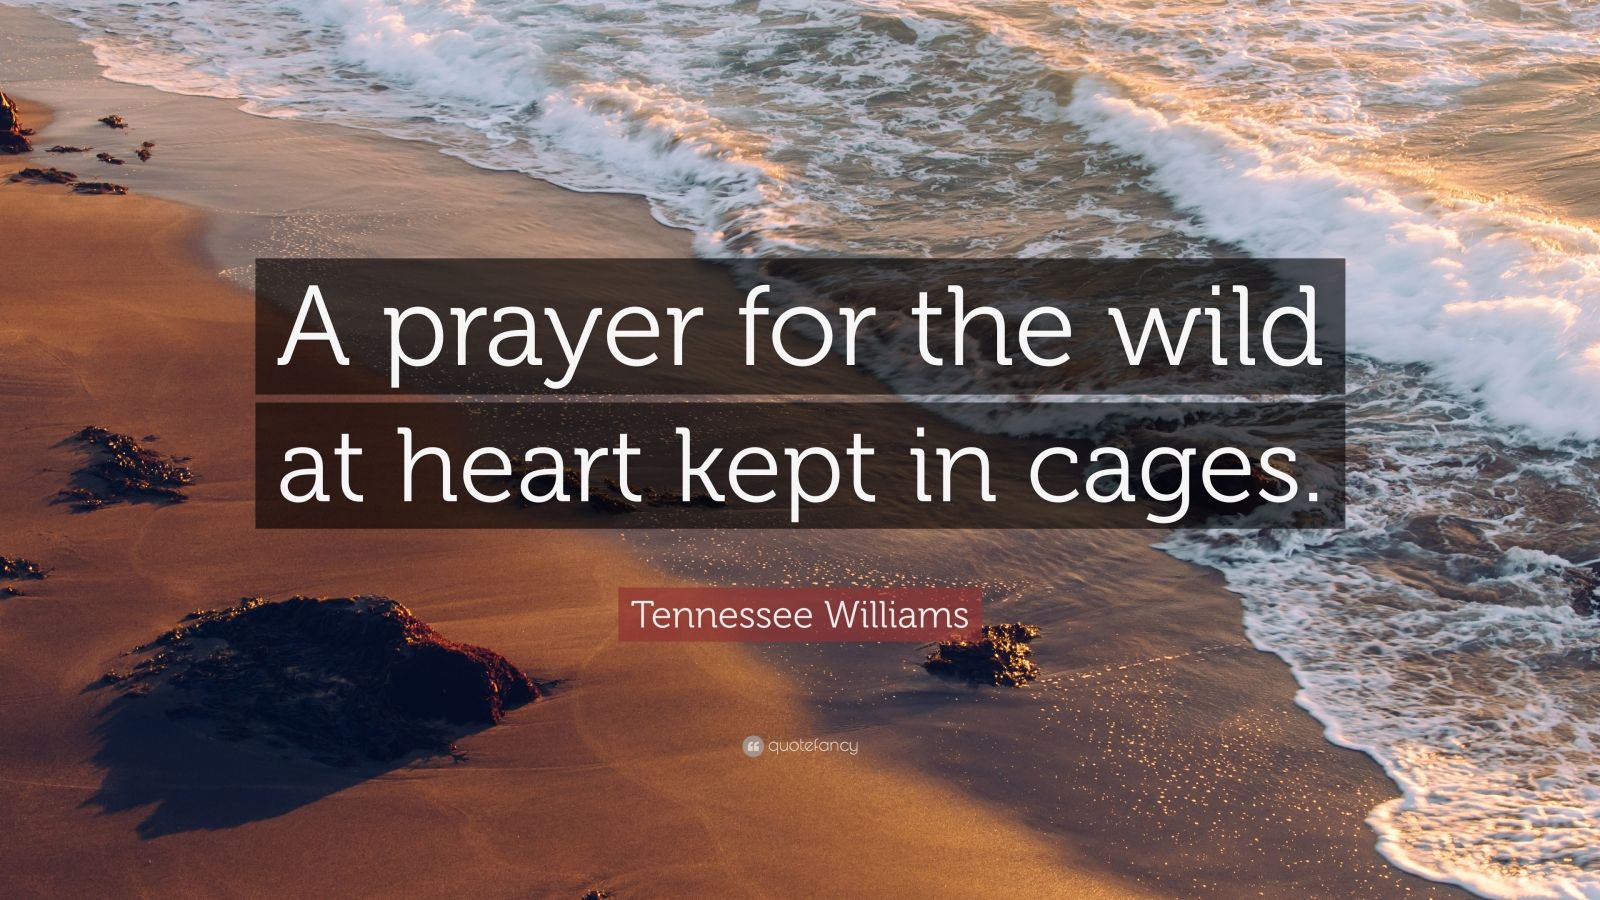 a prayer for the wild at heart kept in cages quote